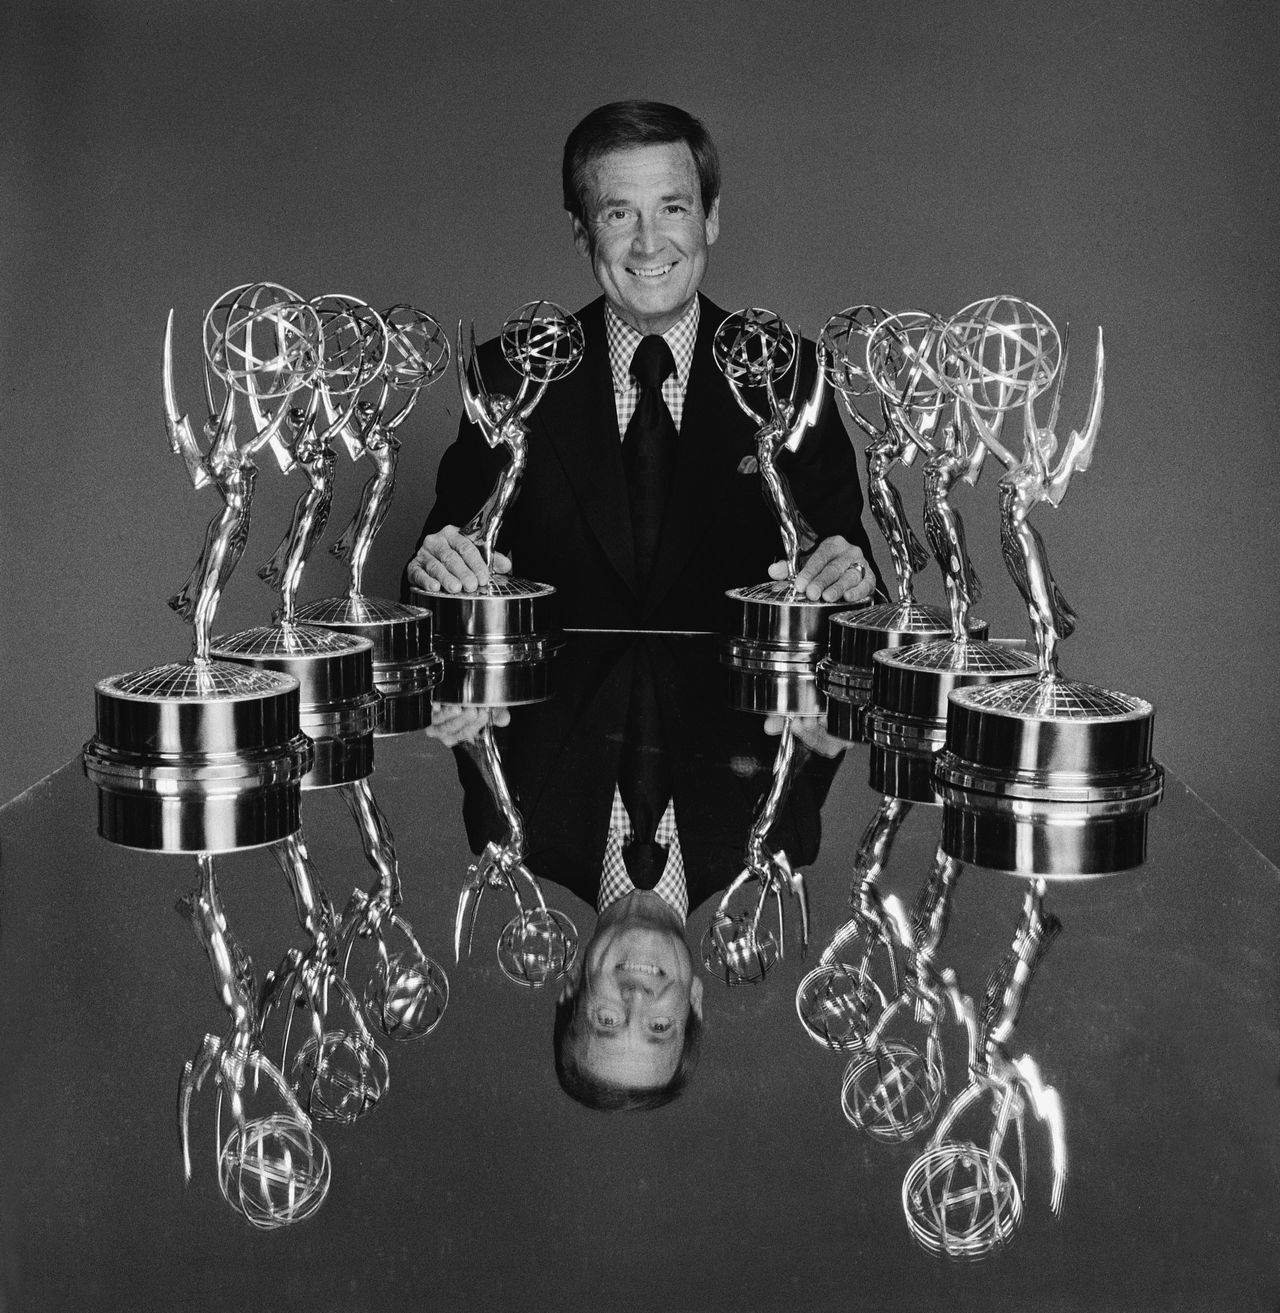 Barker sits at a table with a group of Emmy statues to publicize the Daytime Emmy Awards on March 17, 1976.